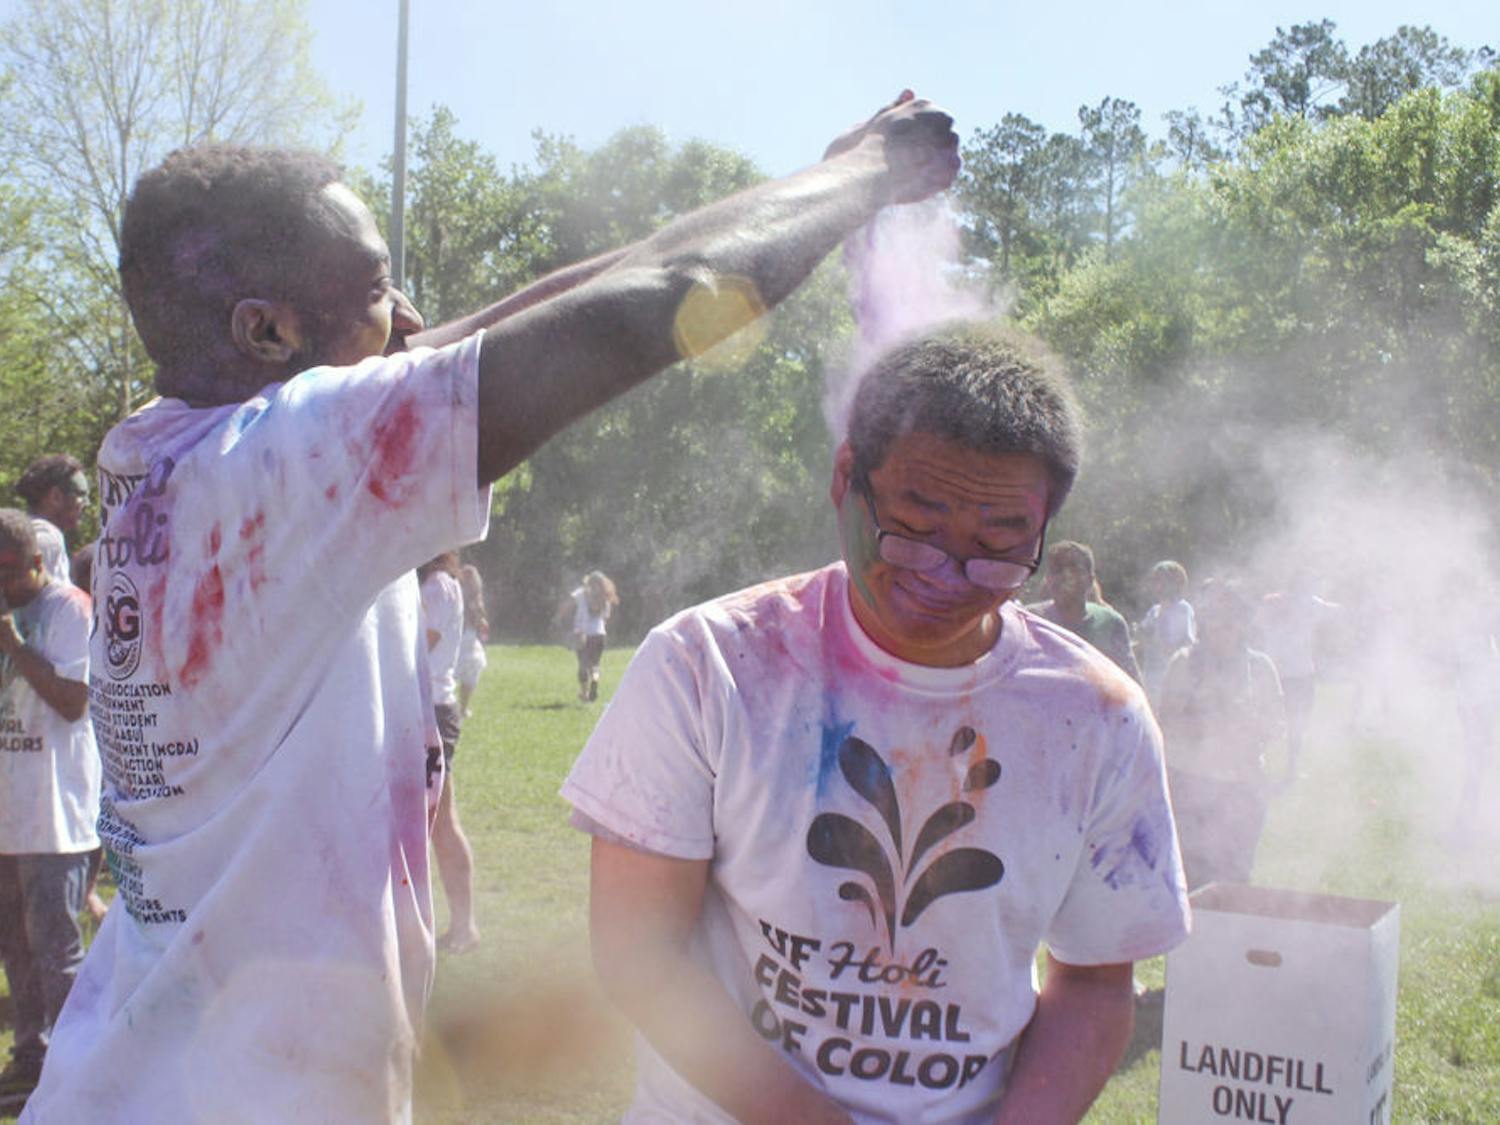 Sedlin Mirtil, a 26-year-old UF second-year pharmacy graduate student, dumps purple powder on Lin Teng, a 26-year-old UF second-year animal science graduate student, to celebrate the arrival of spring during UF Holi on Sunday.